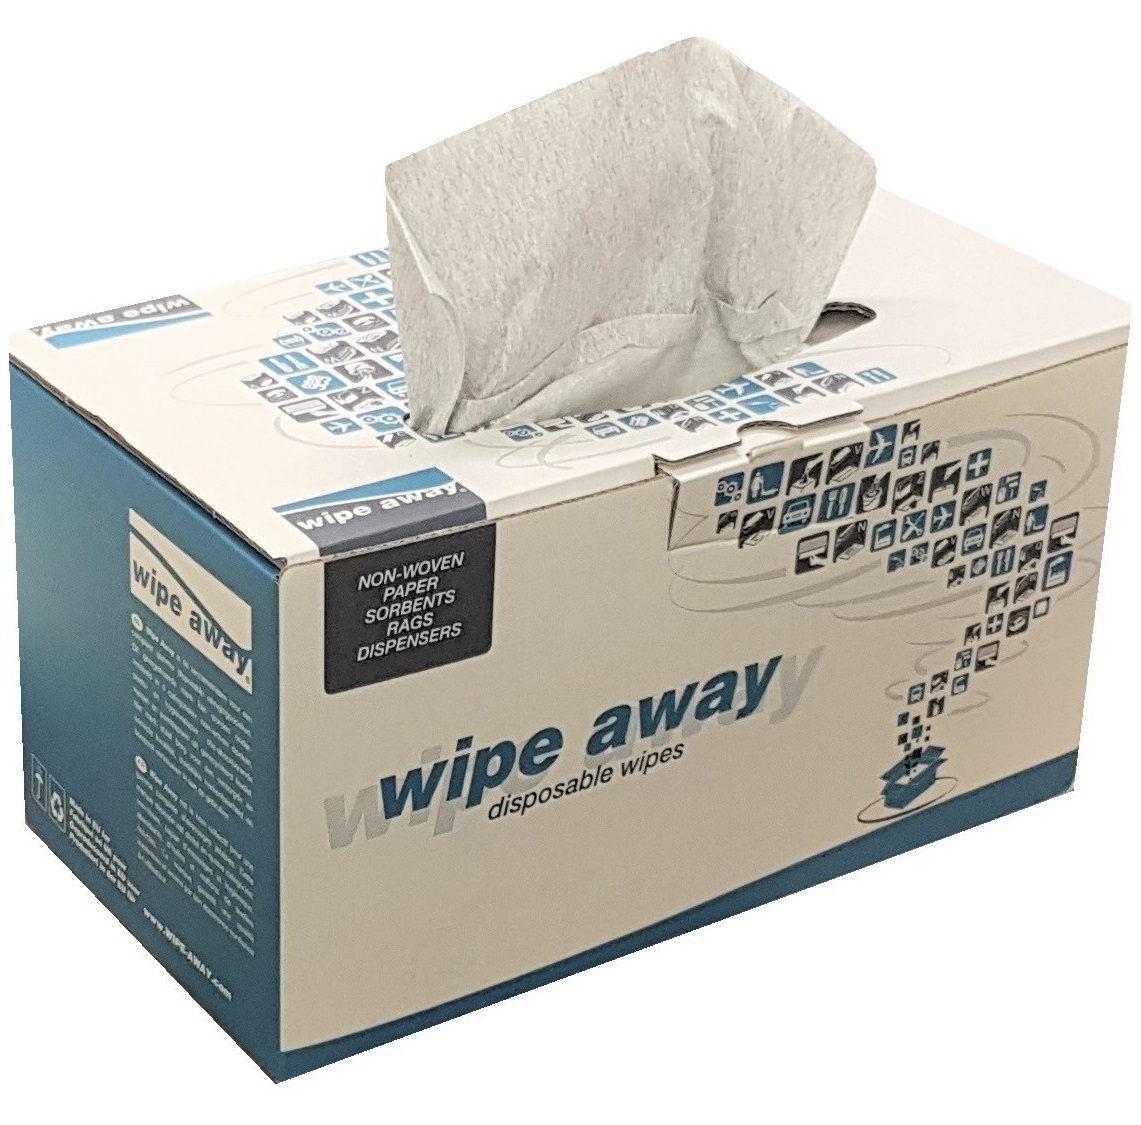 KX70 Printers Lint Free Wipes in Easy Pull Dispenser